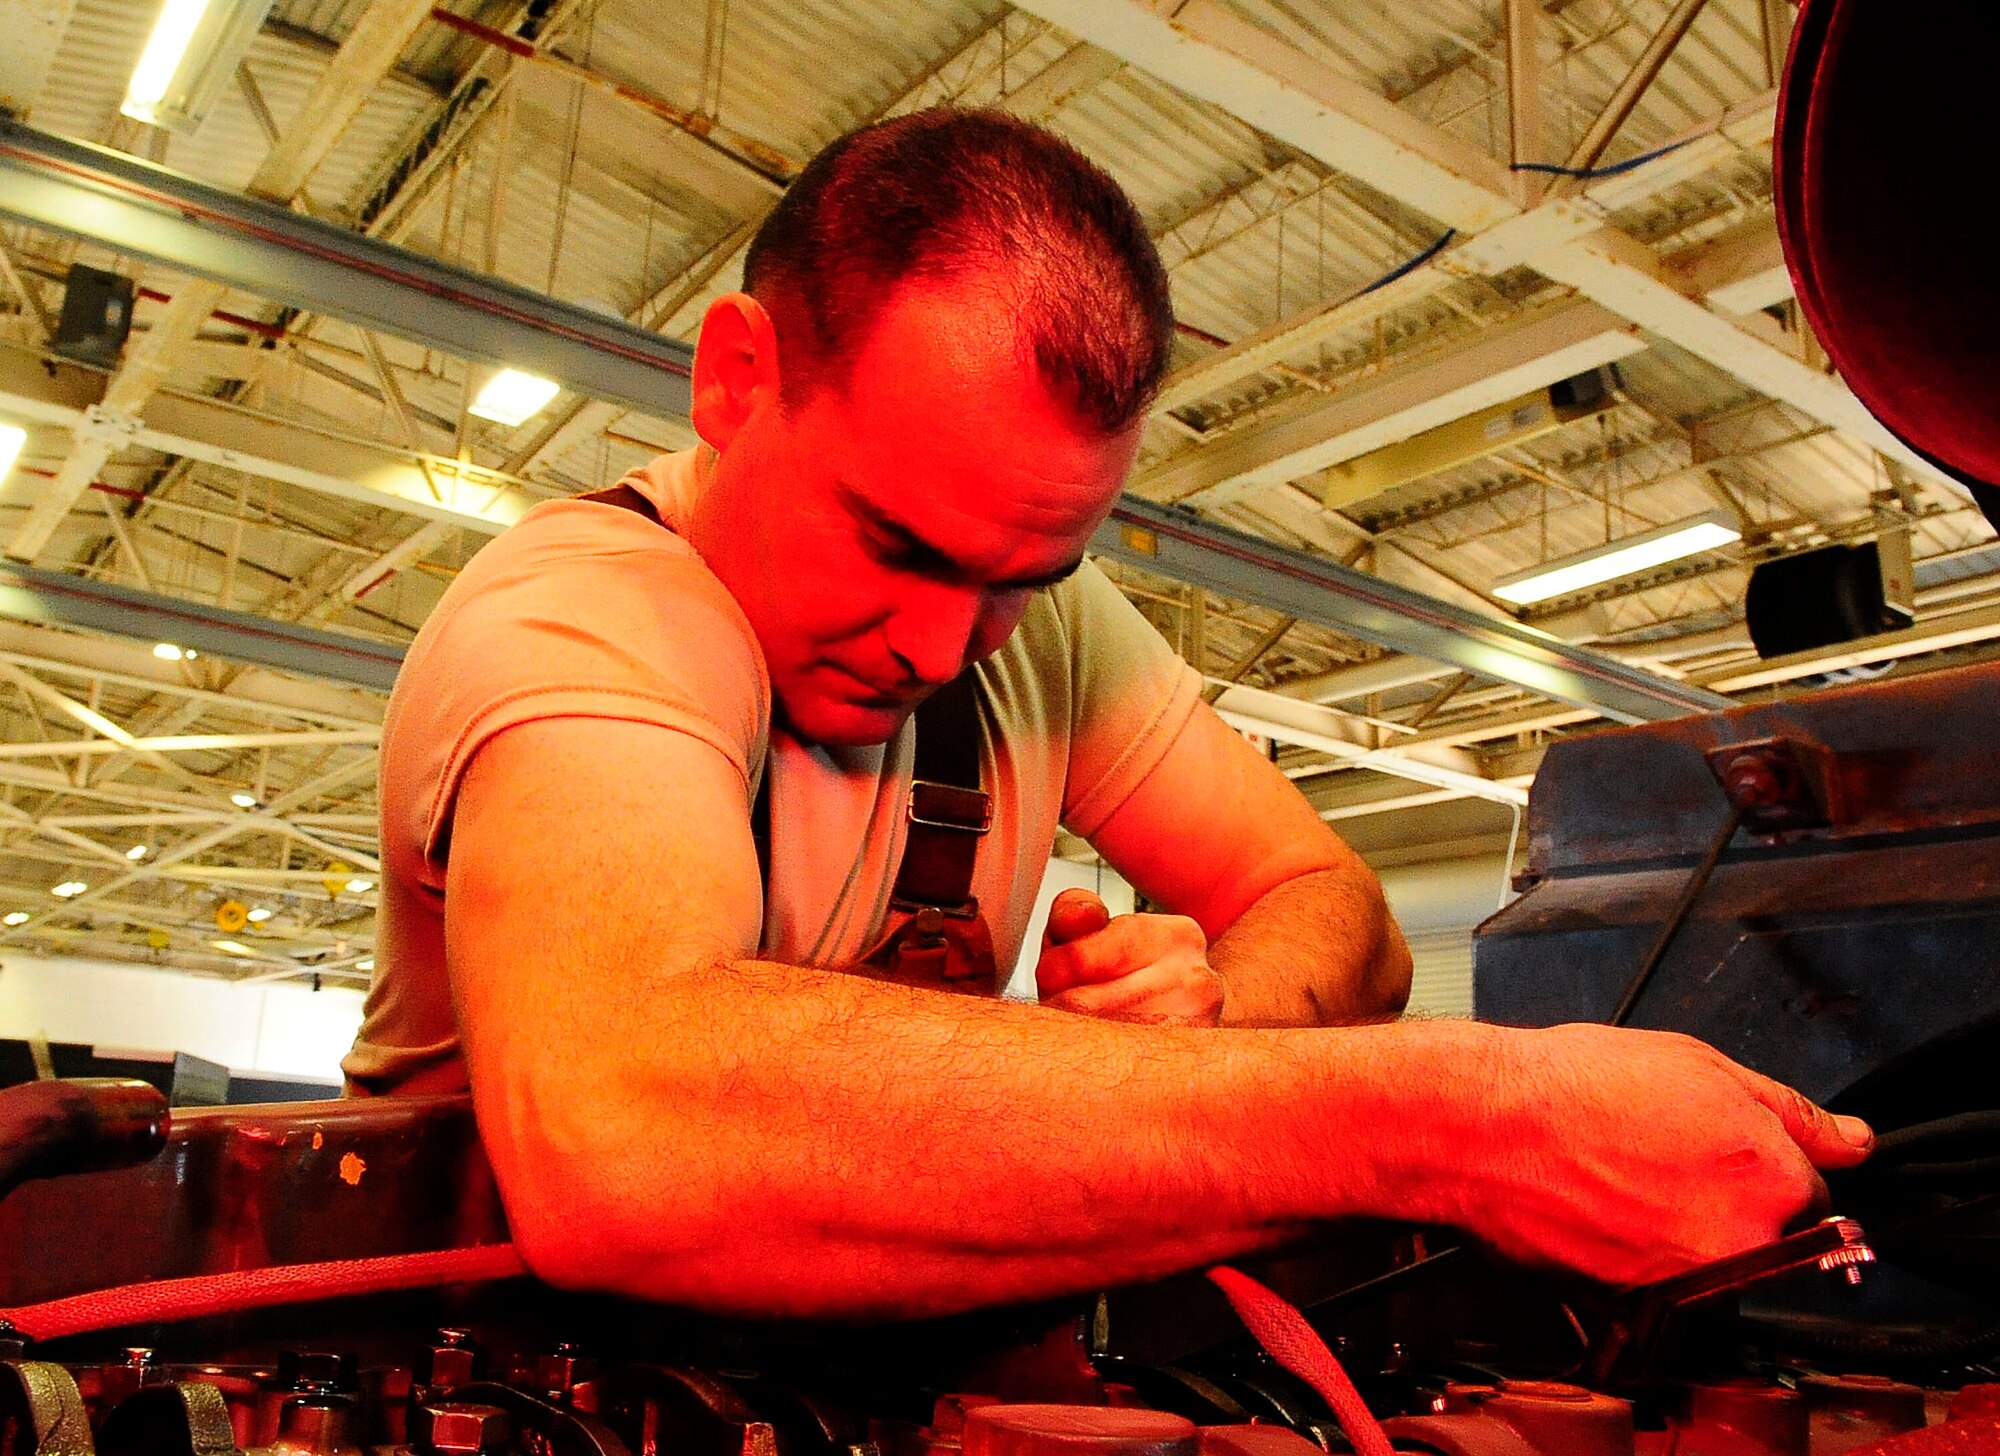 Staff Sgt. Nicholas Cawley, 1st Special Operation Logistics Readiness Squadron vehicle equipment journeyman, tightens a bolt on a fire truck at Hurlburt Filed, Fla., Jan. 21, 2015. Cawley was fixing the water pump on the fire truck. (U.S. Air Force photo/Airman 1st Class Andrea Posey)